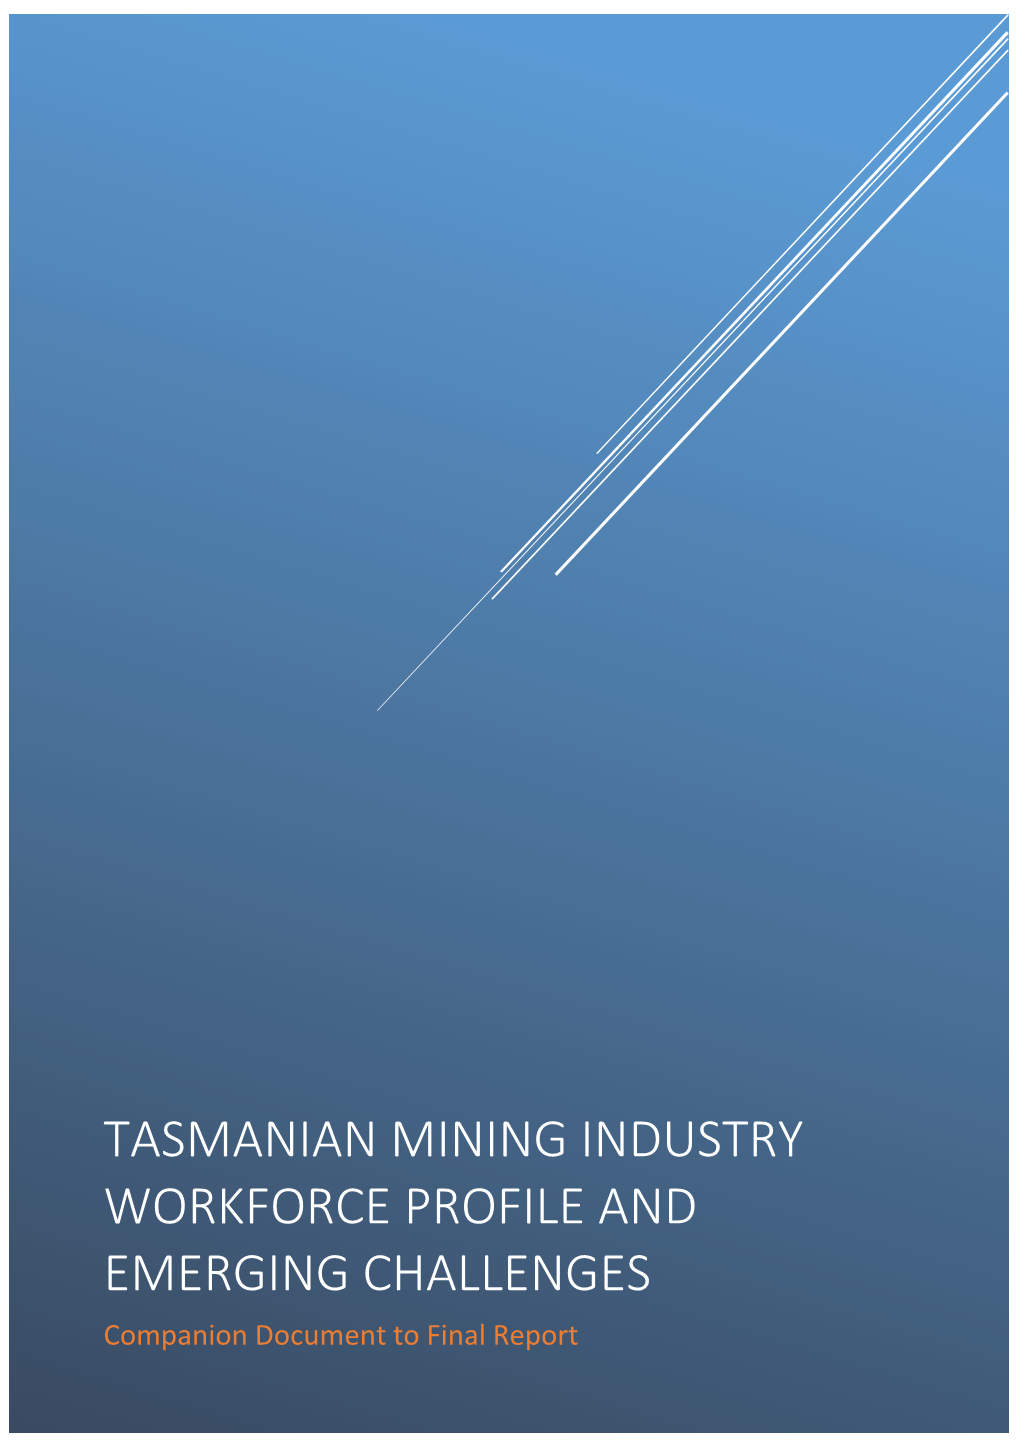 TASMANIAN MINING INDUSTRY WORKFORCE PROFILE and EMERGING CHALLENGES Companion Document to Final Report I